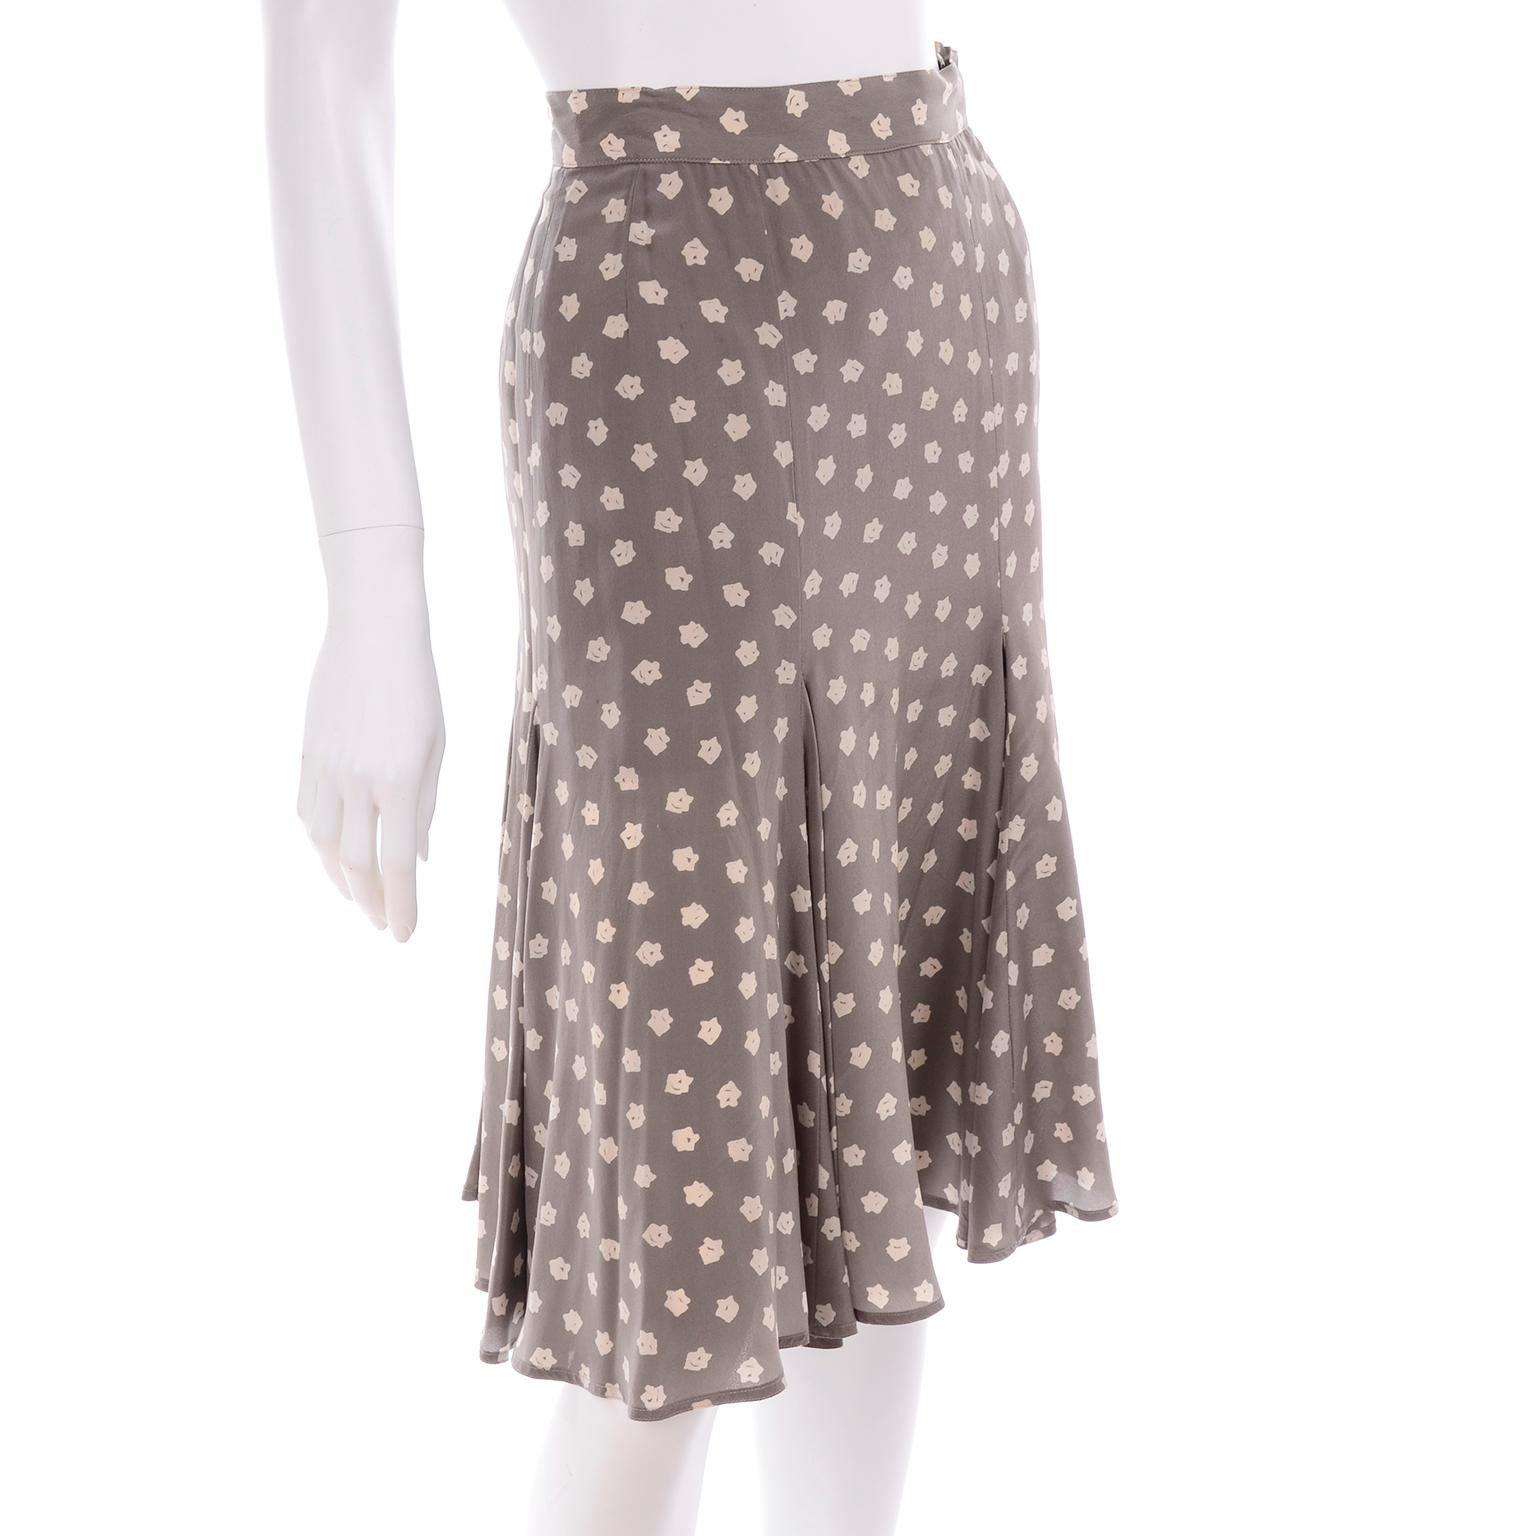 Vintage Ferragamo Silk Pleated Tan and Cream Floral Print Skirt In Excellent Condition For Sale In Portland, OR